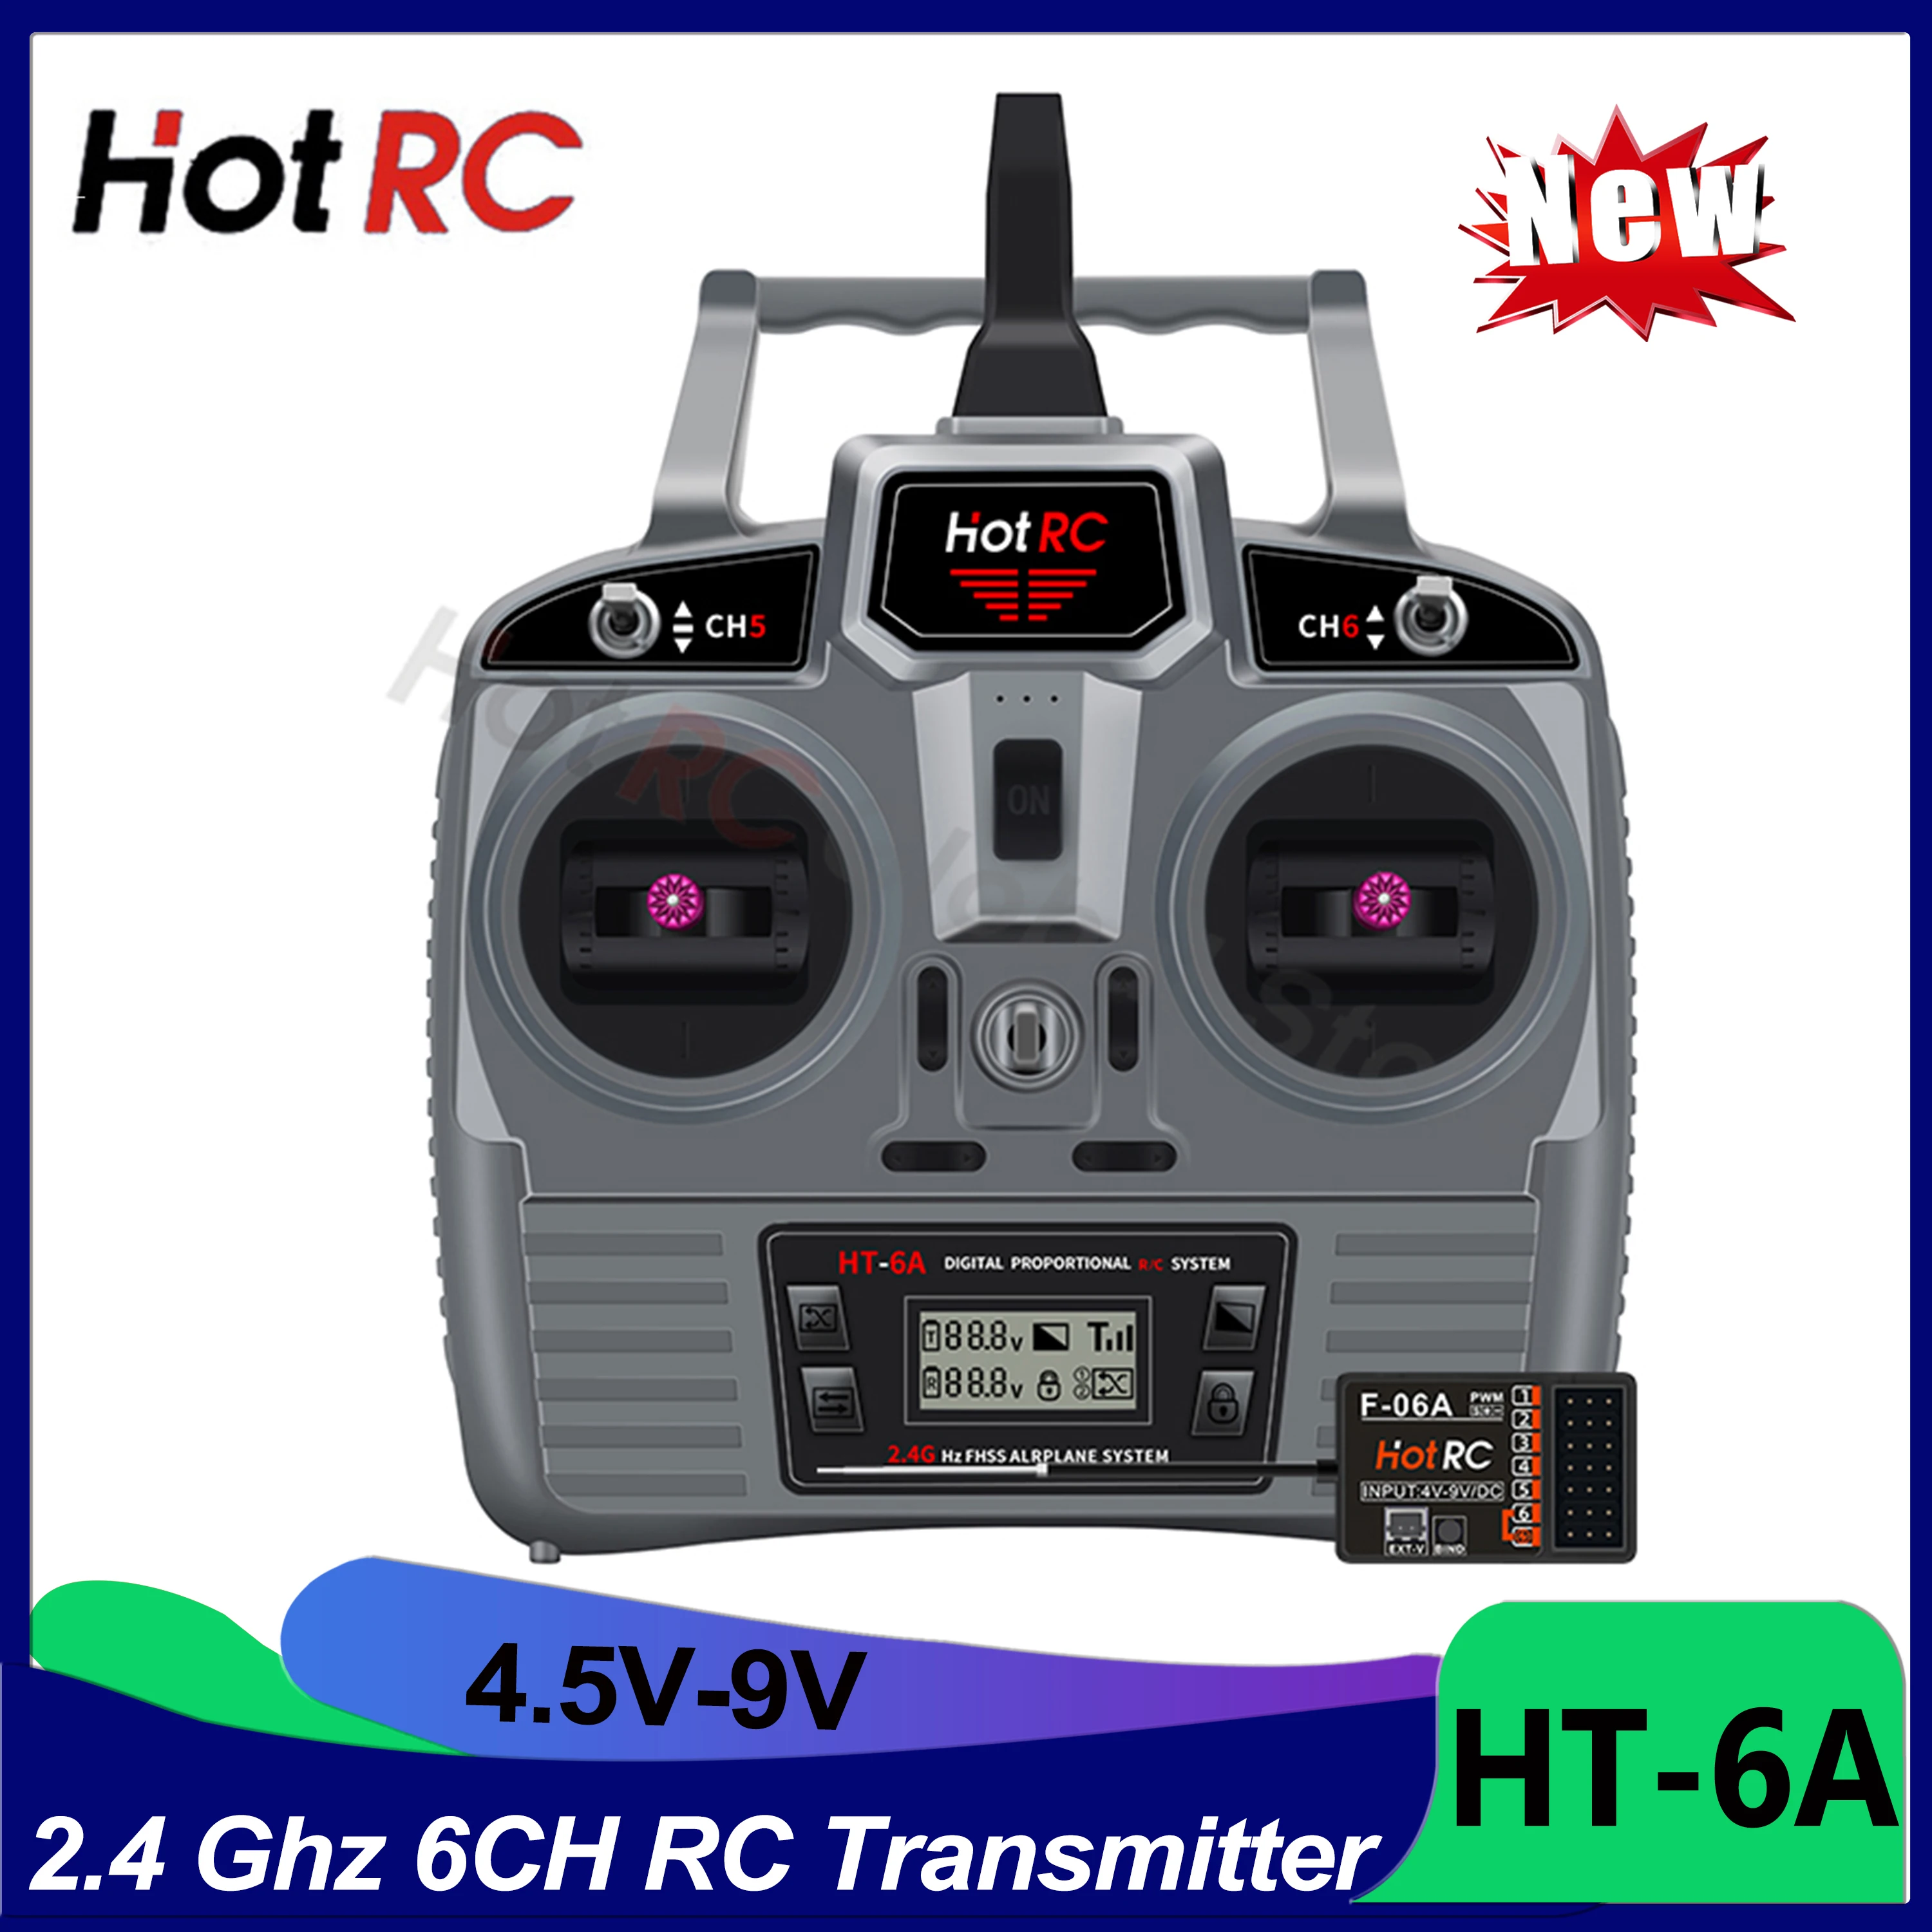 

HOTRC HT-6A 2.4G 6CH RC Transmitter FHSS 6CH Receiver F-06A Mode2 Left Hand 6 Channel for RC FPV Drone Airplane RC Car Boat